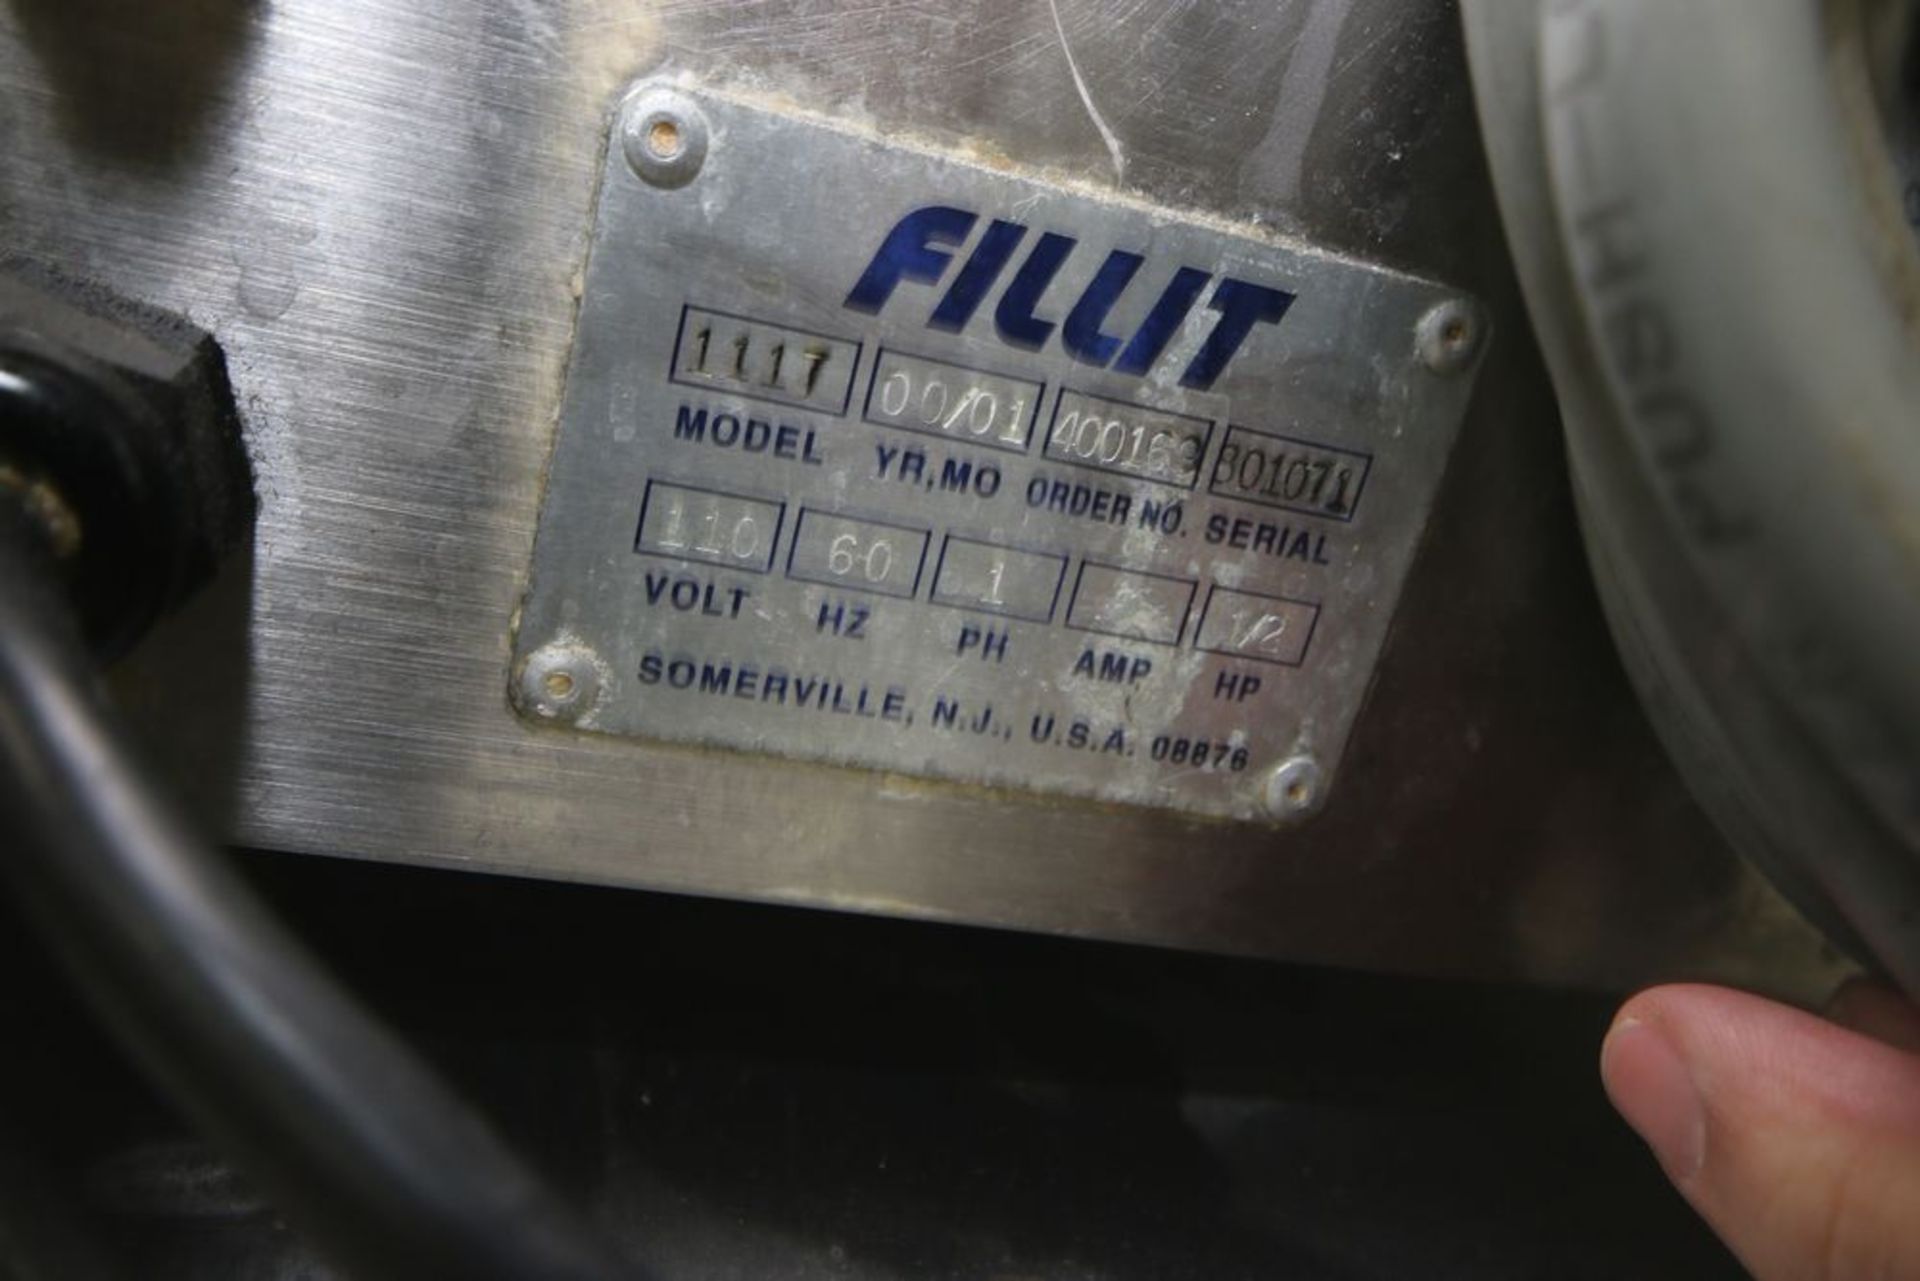 Fill-IT Single Head S/S Filler, M/N 1117, S/N 801071, 110 Volts, 1 Phase, with Operating Manual, - Image 5 of 5